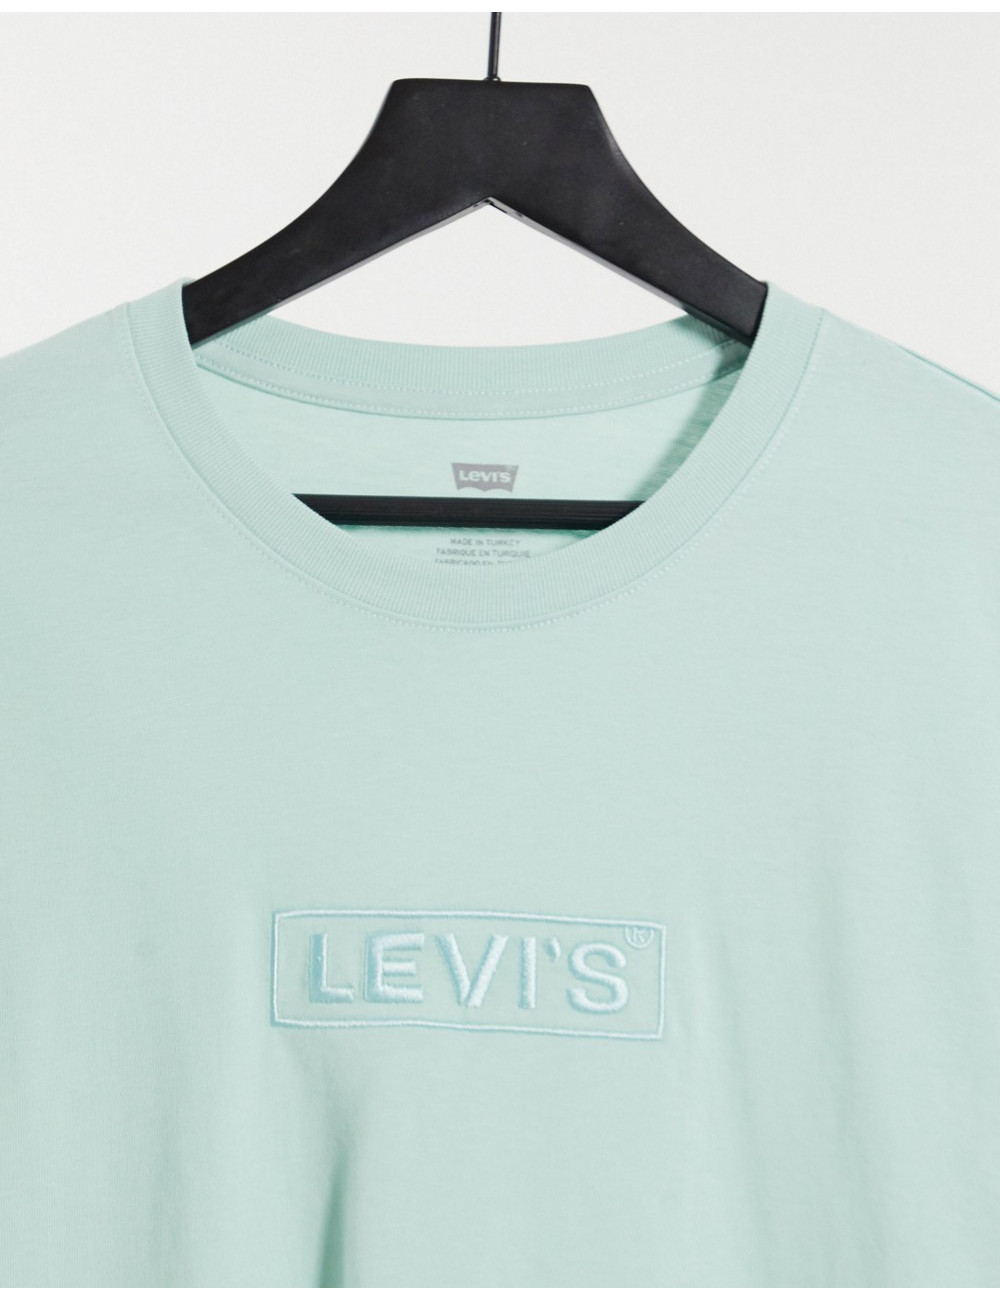 Levi's embroidered logo...